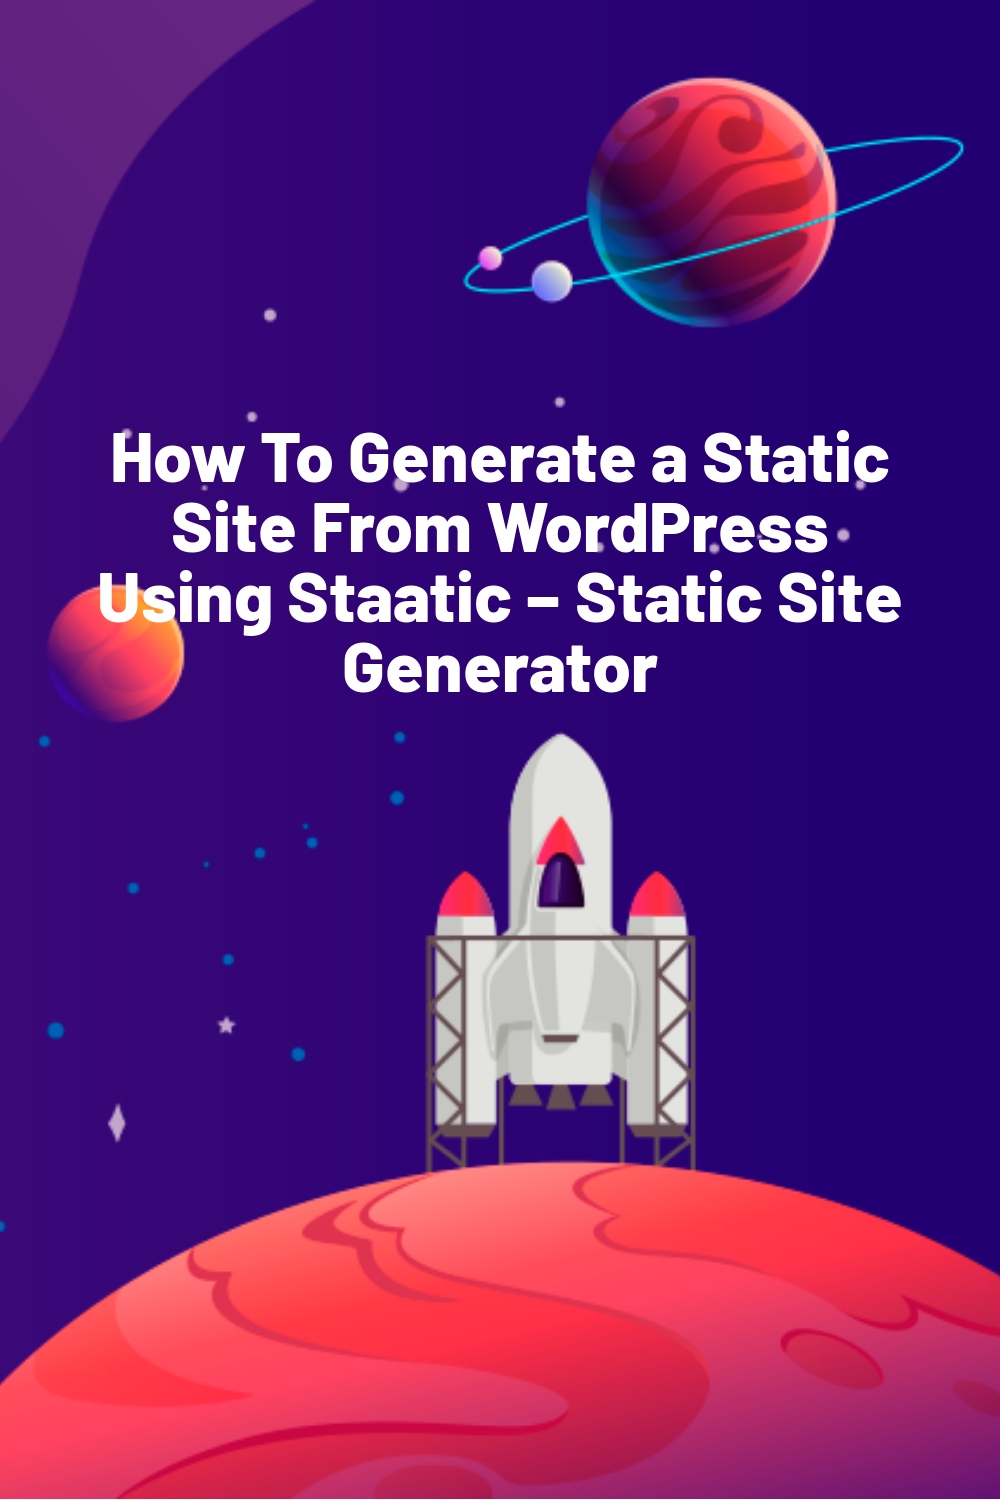 How To Generate a Static Site From WordPress Using Staatic – Static Site Generator